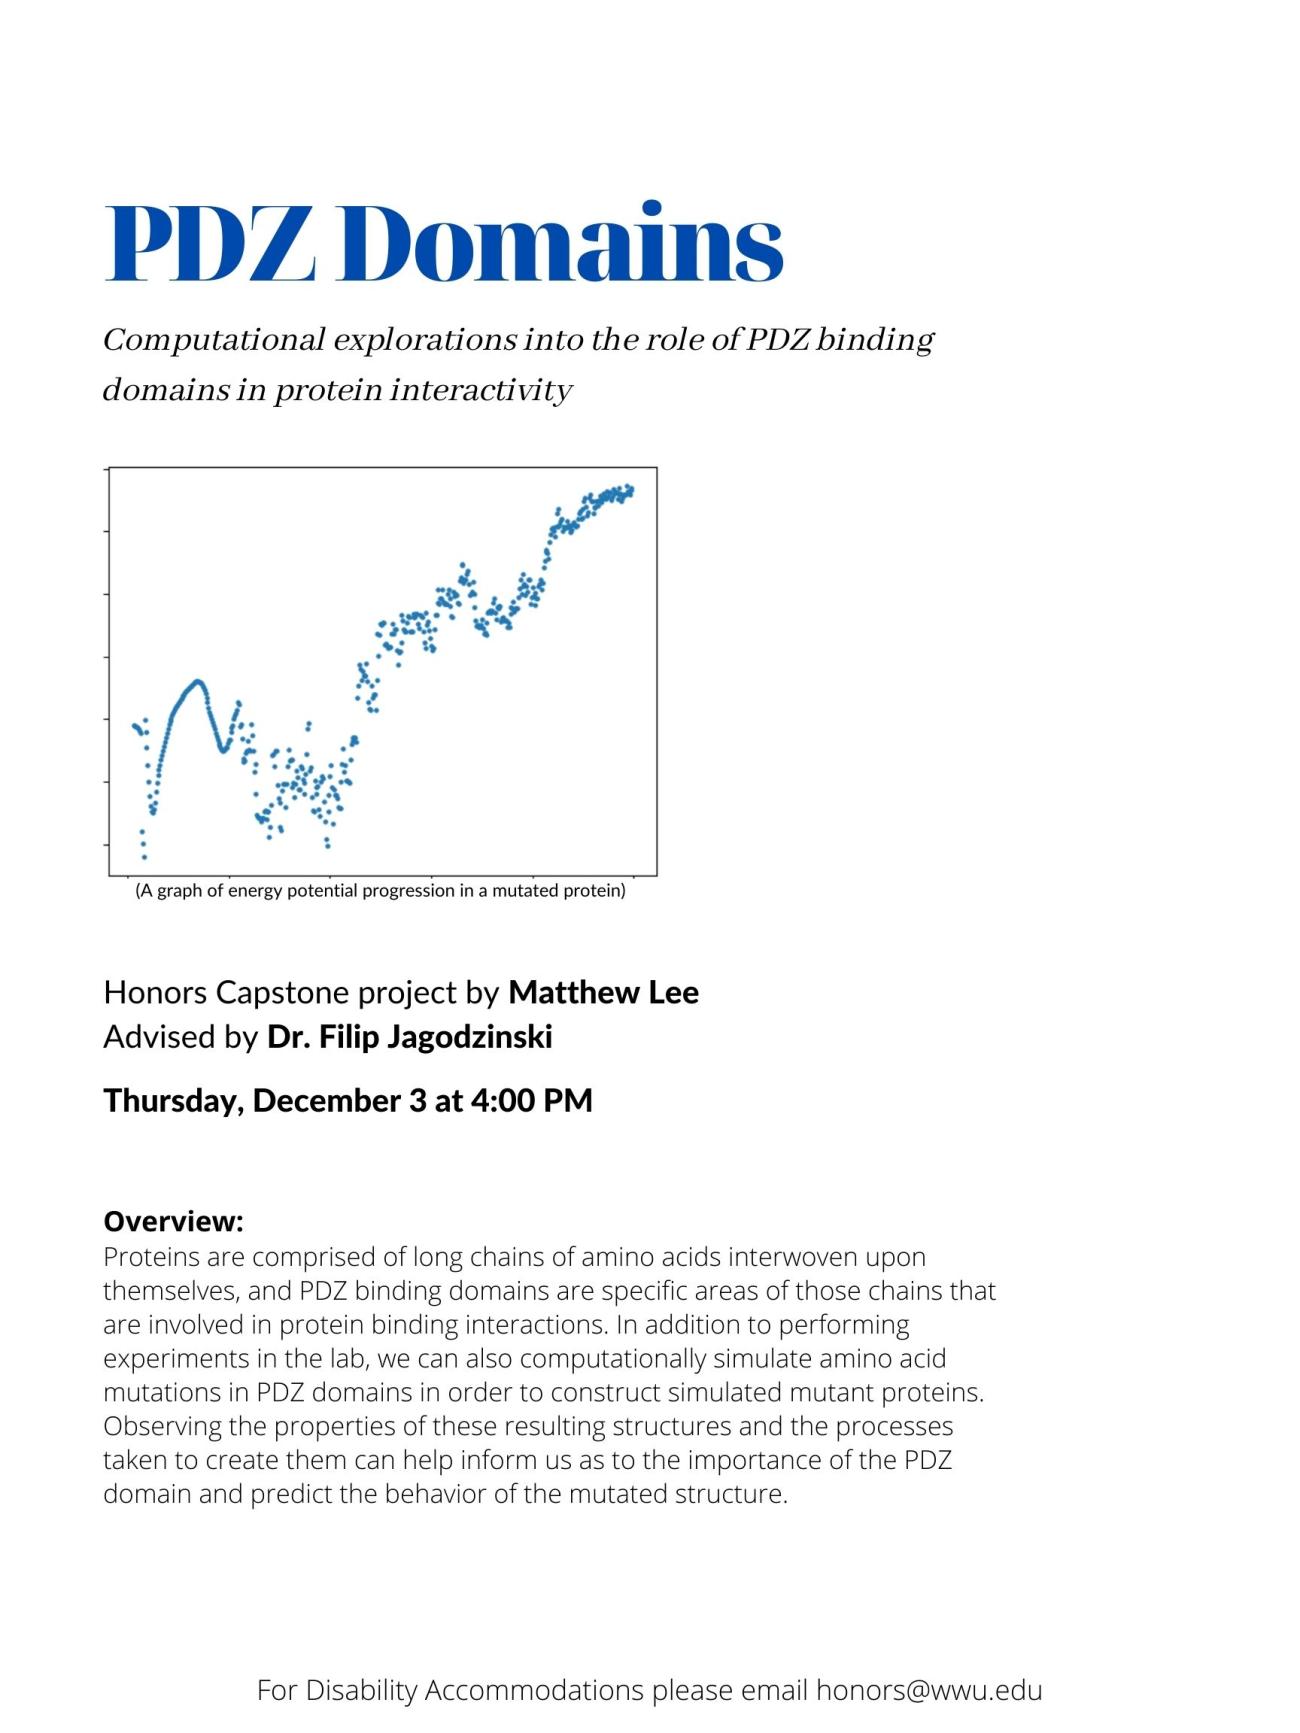 Image: A scatter plot of points on a graph, with the caption "A graph of energy potential progression in a mutated protein". Text: "PDZ Domains: Computational explorations into the role of PDZ binding domains in protein interactivity.  Honors Capstone project by Matthew Lee.  Advised by Dr. Filip Jagodzinski.  Thursday, December 3 at 4:00 PM. For Disability Accommodations please email honors@wwu.edu"